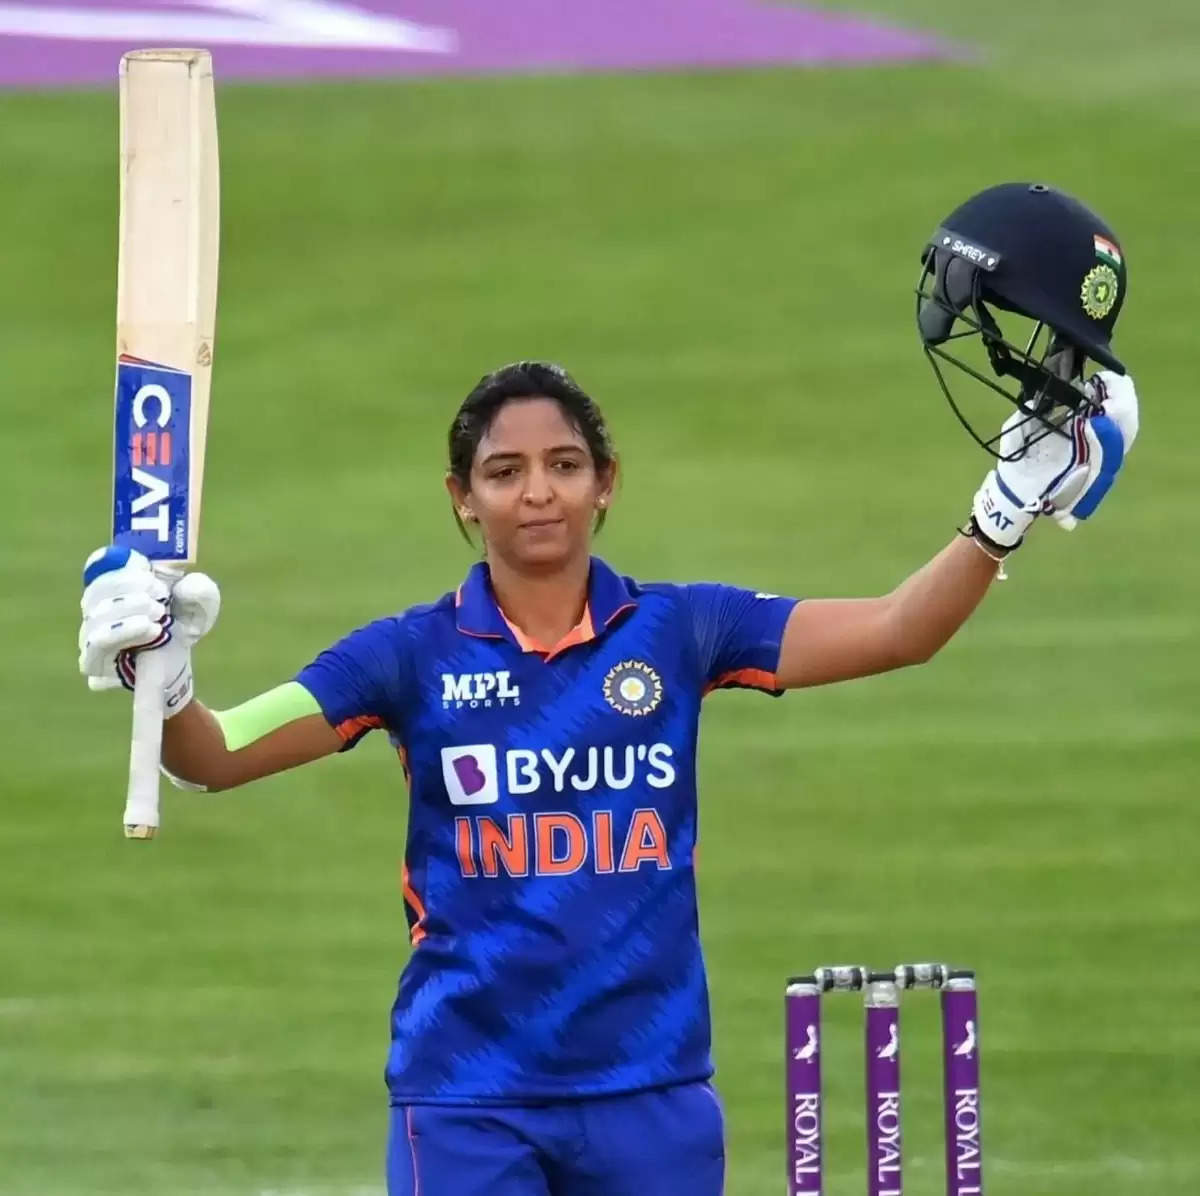 India is ecstatic that its skipper has been chosen Wisden's Cricketer of the Year, says Harmanpreet Kaur.